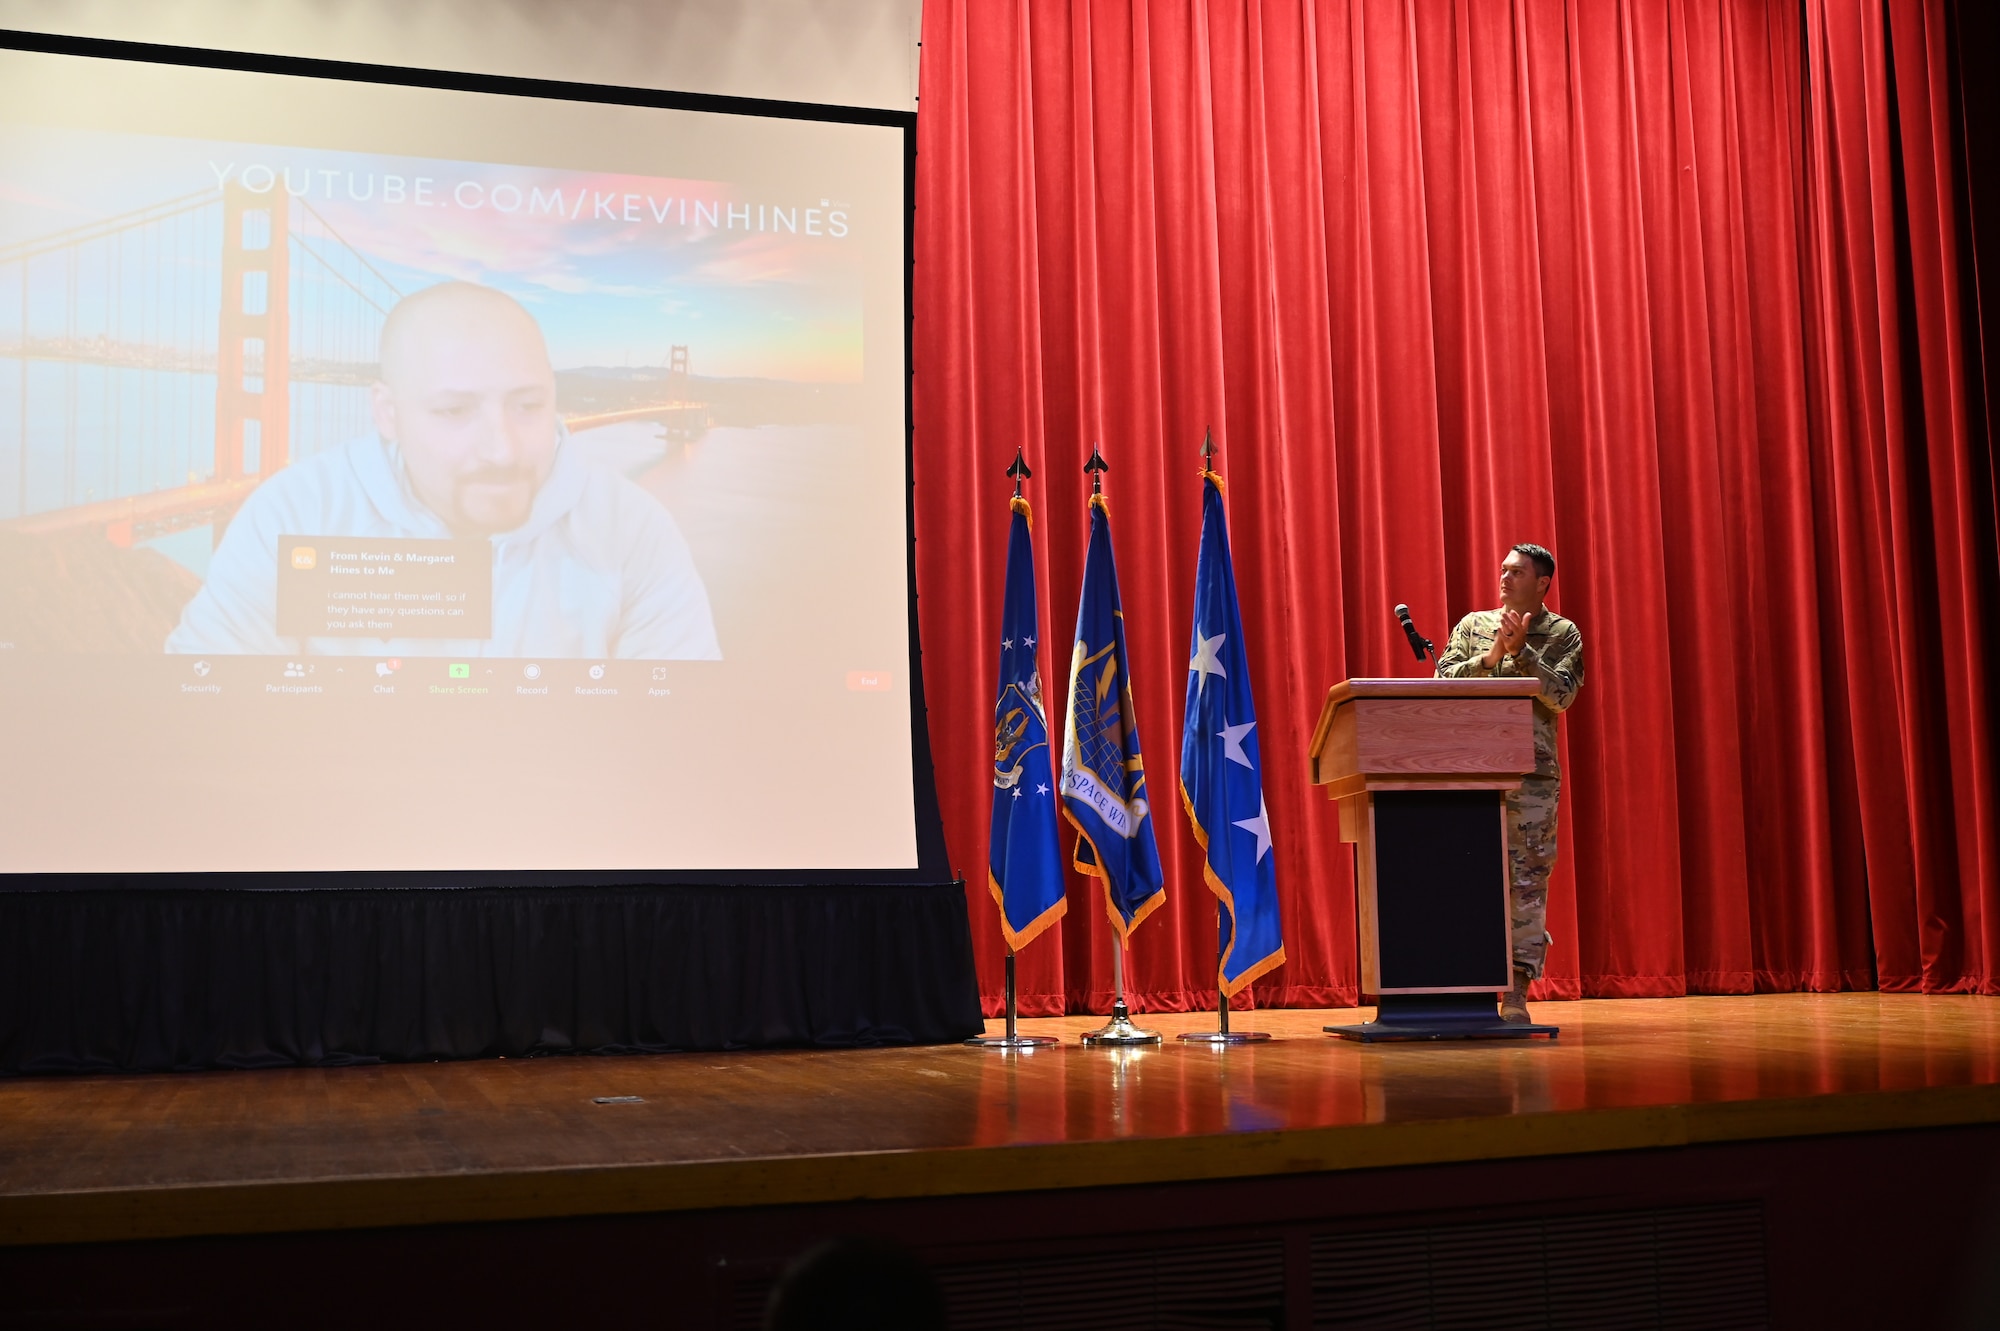 Col. Richard Erredge, 960th Cyberspace Wing commander (right), thanks Kevin Hines for telling his story during the wing’s mental health & resiliency fair May 14, 2022, at the Bob Hope Performing Arts Center, Joint Base San Antonio-Lackland, Texas.